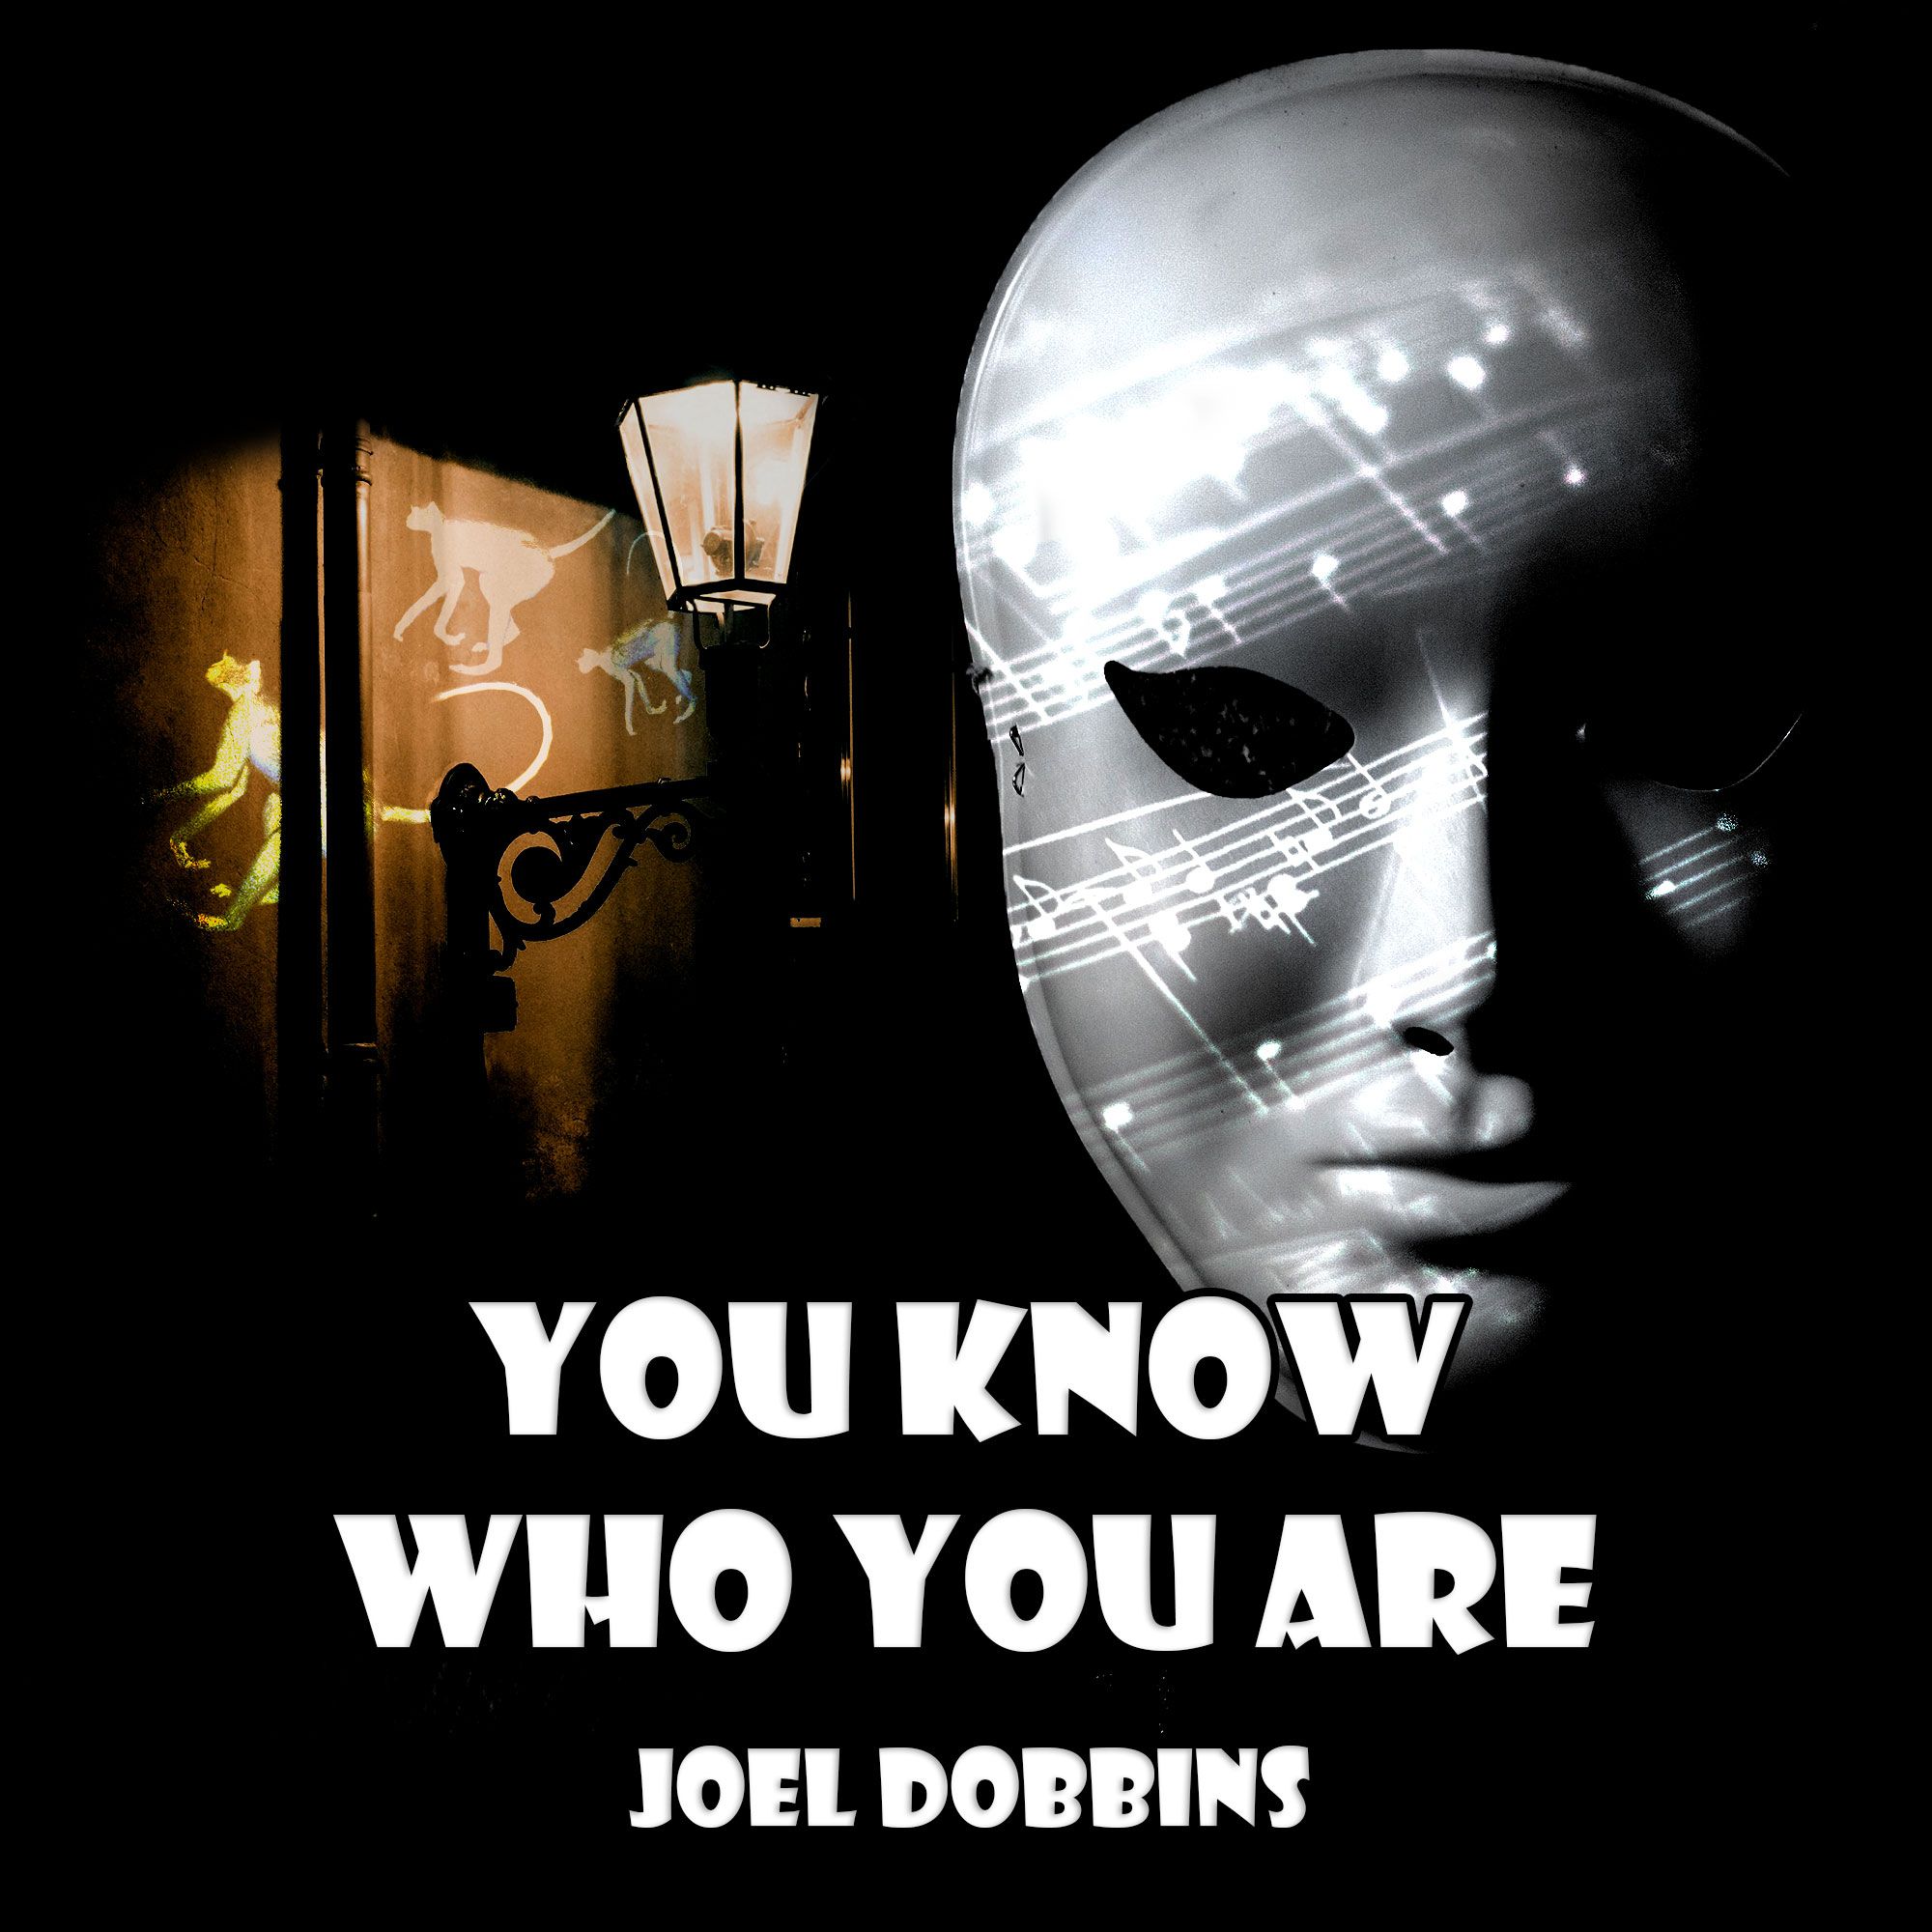 You Know Who You Are Album for Joel Dobbins